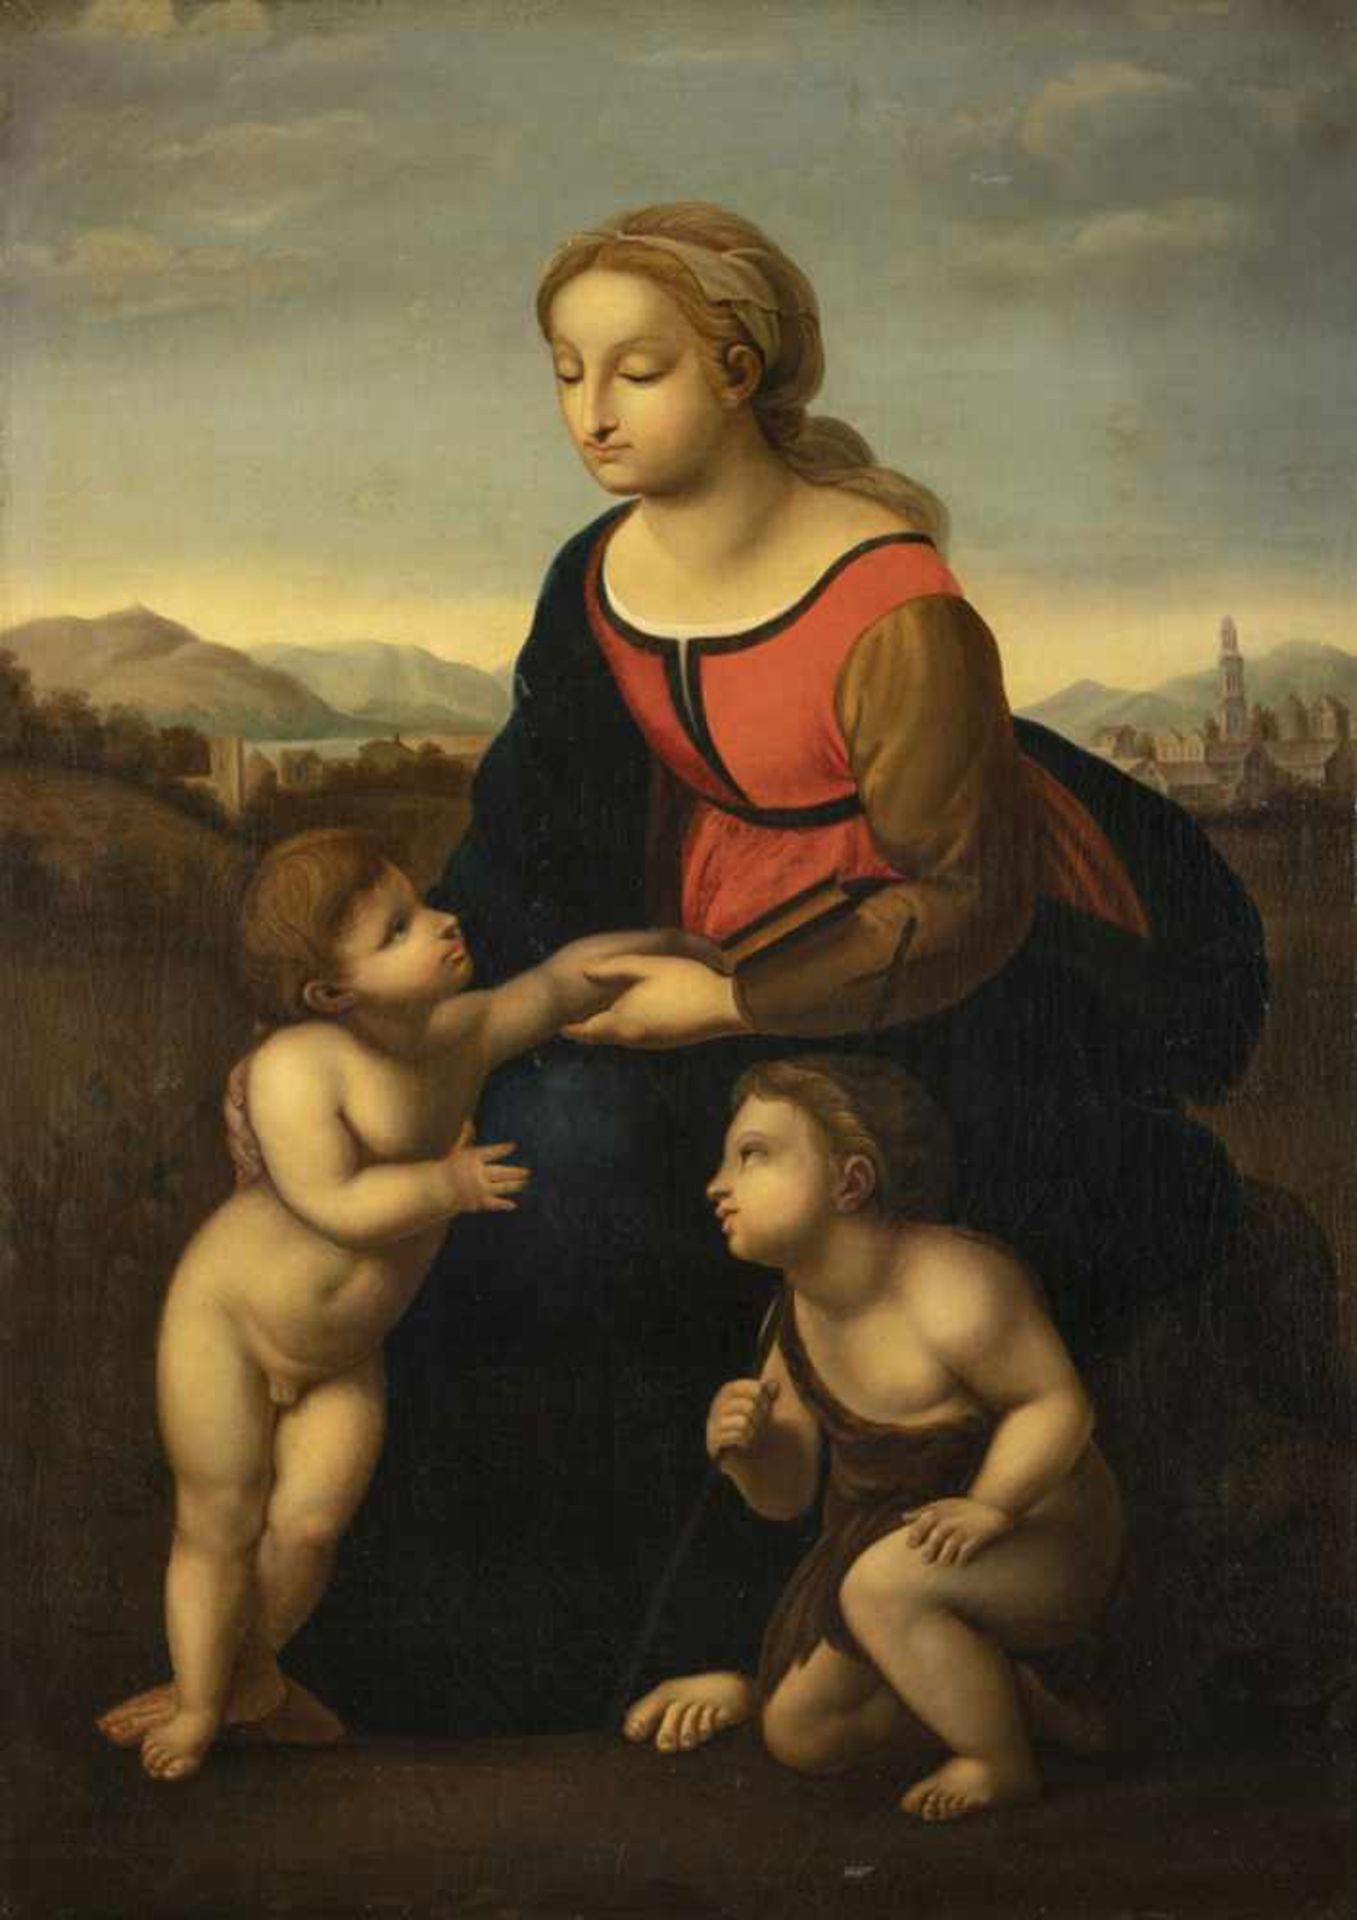 SANZIO, RAFFAELLO (after, 1483-1520). The Virgin with Christ Child and Infant St. John.("The